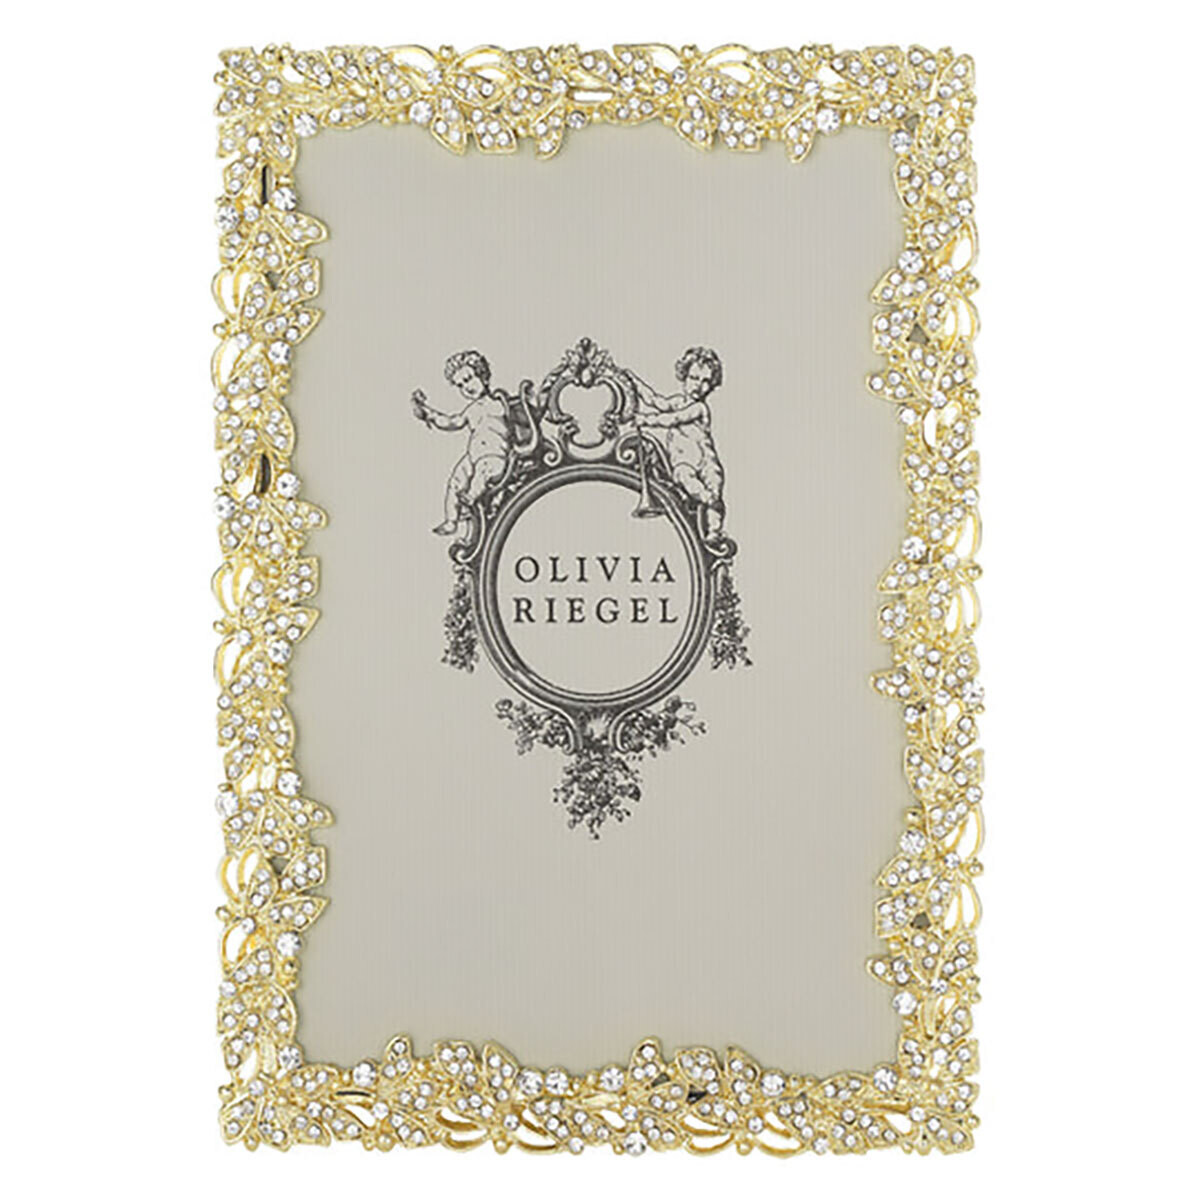 Olivia Riegel Gold Lottie 4" x 6" Picture Frame RT4504